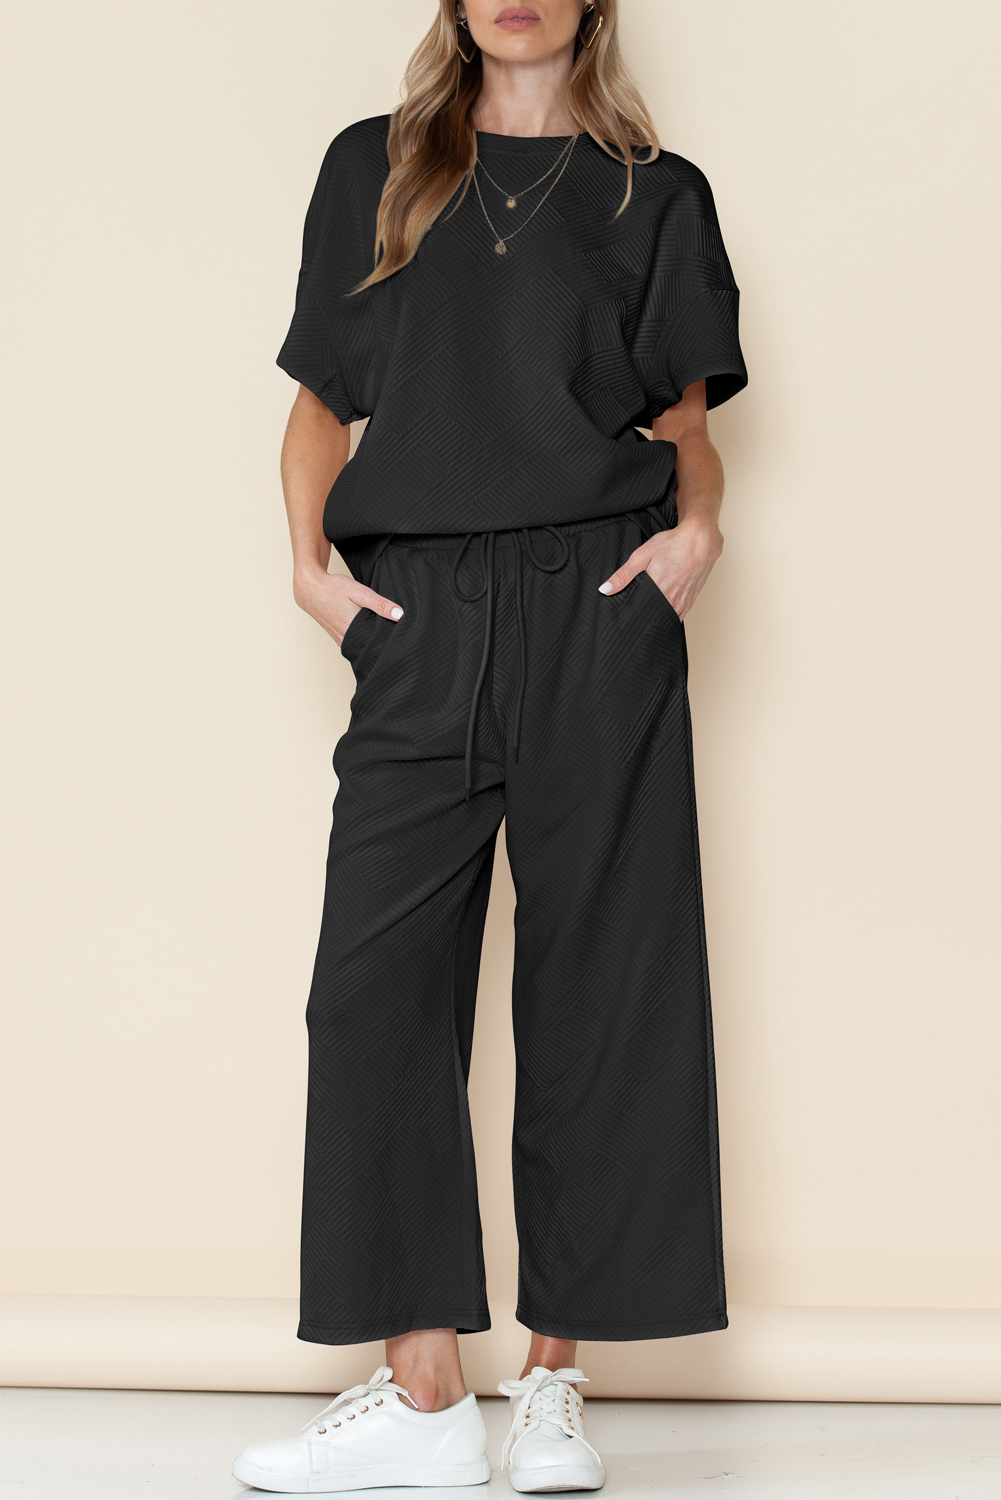 Shewin Wholesale WESTERN Boutique Black Textured Loose Fit T Shirt and Drawstring Pants Set